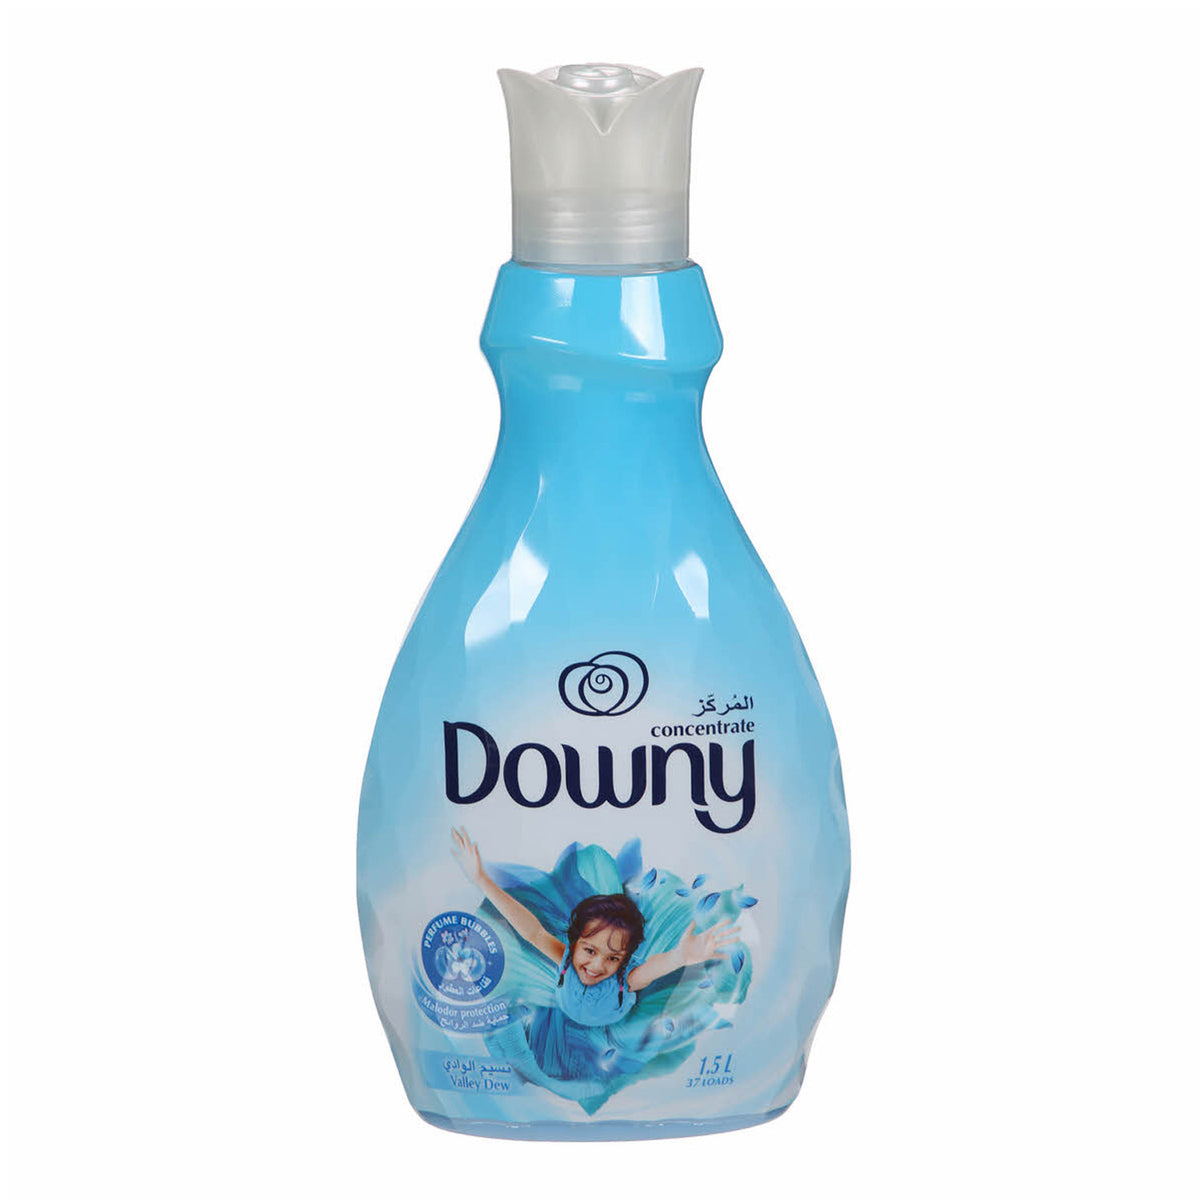 Downy Concentrate  valley dew 1.5ltr